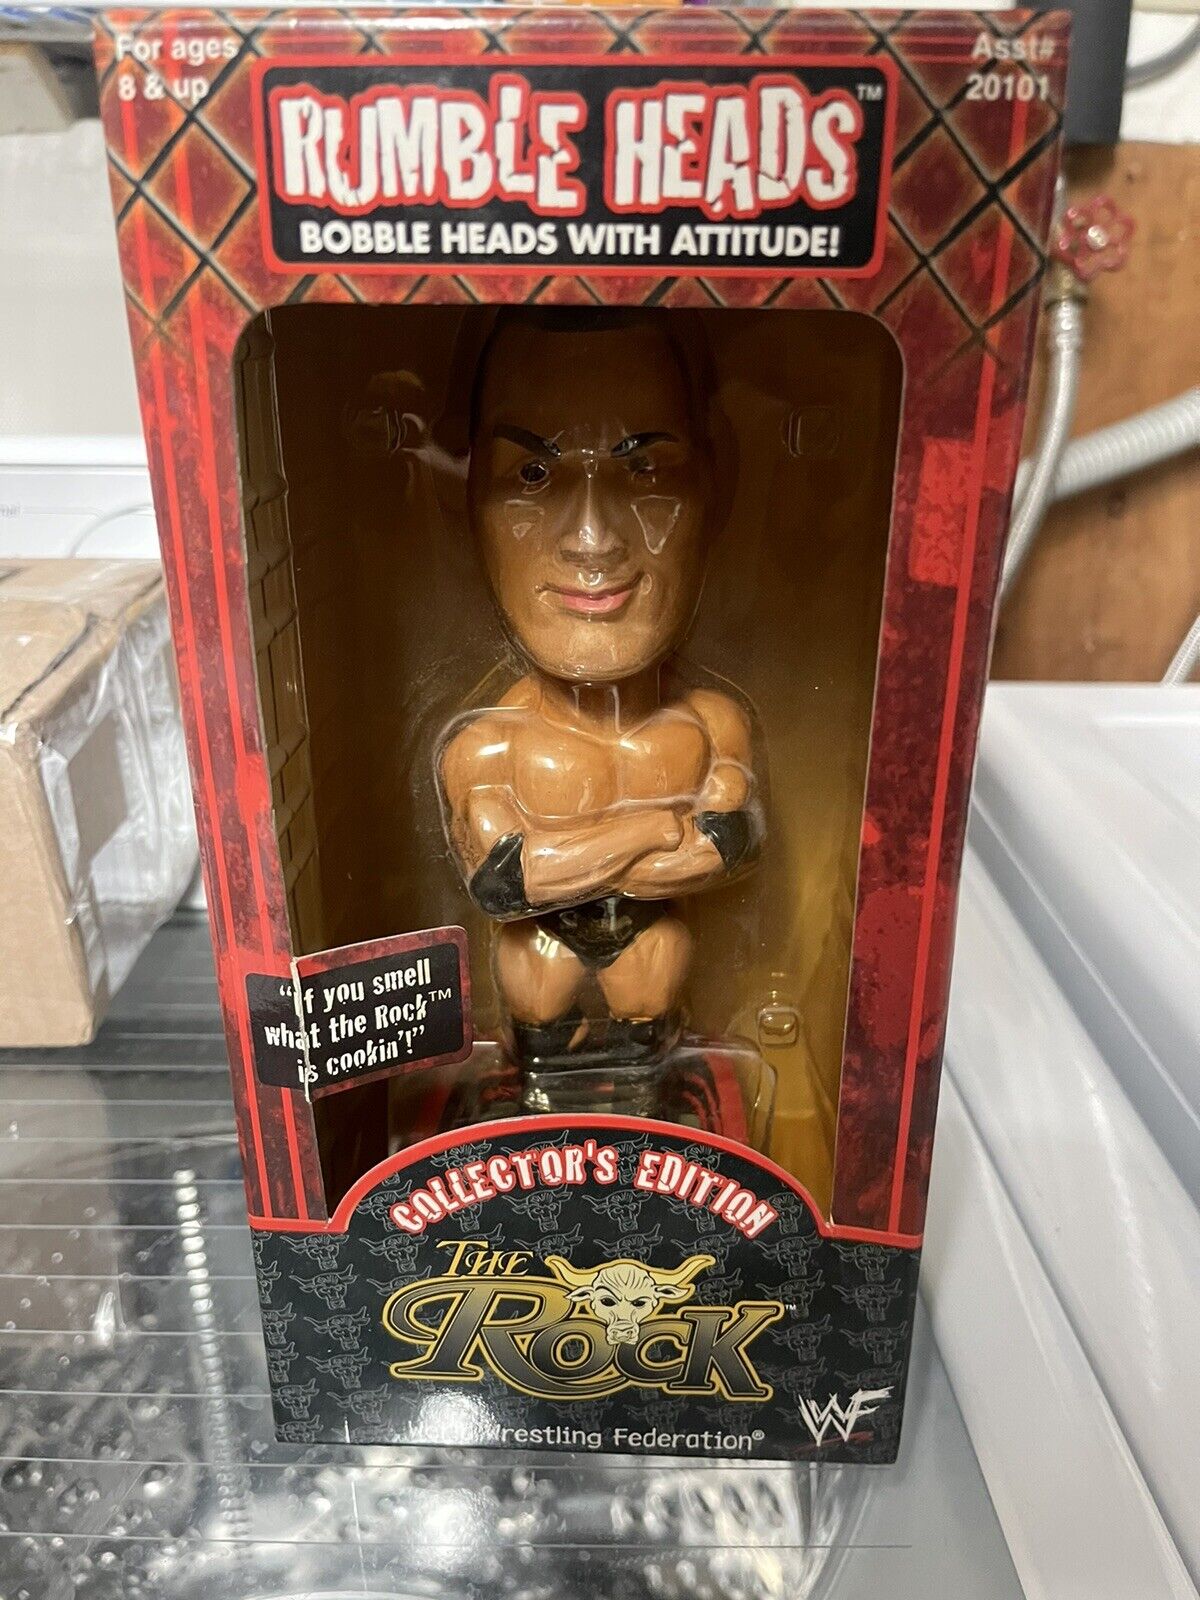 WWF WRESTING RUMBLE HEADS COLLECTOR'S EDITION THE ROCK COLLECTIBLE BOBBLE HEAD 